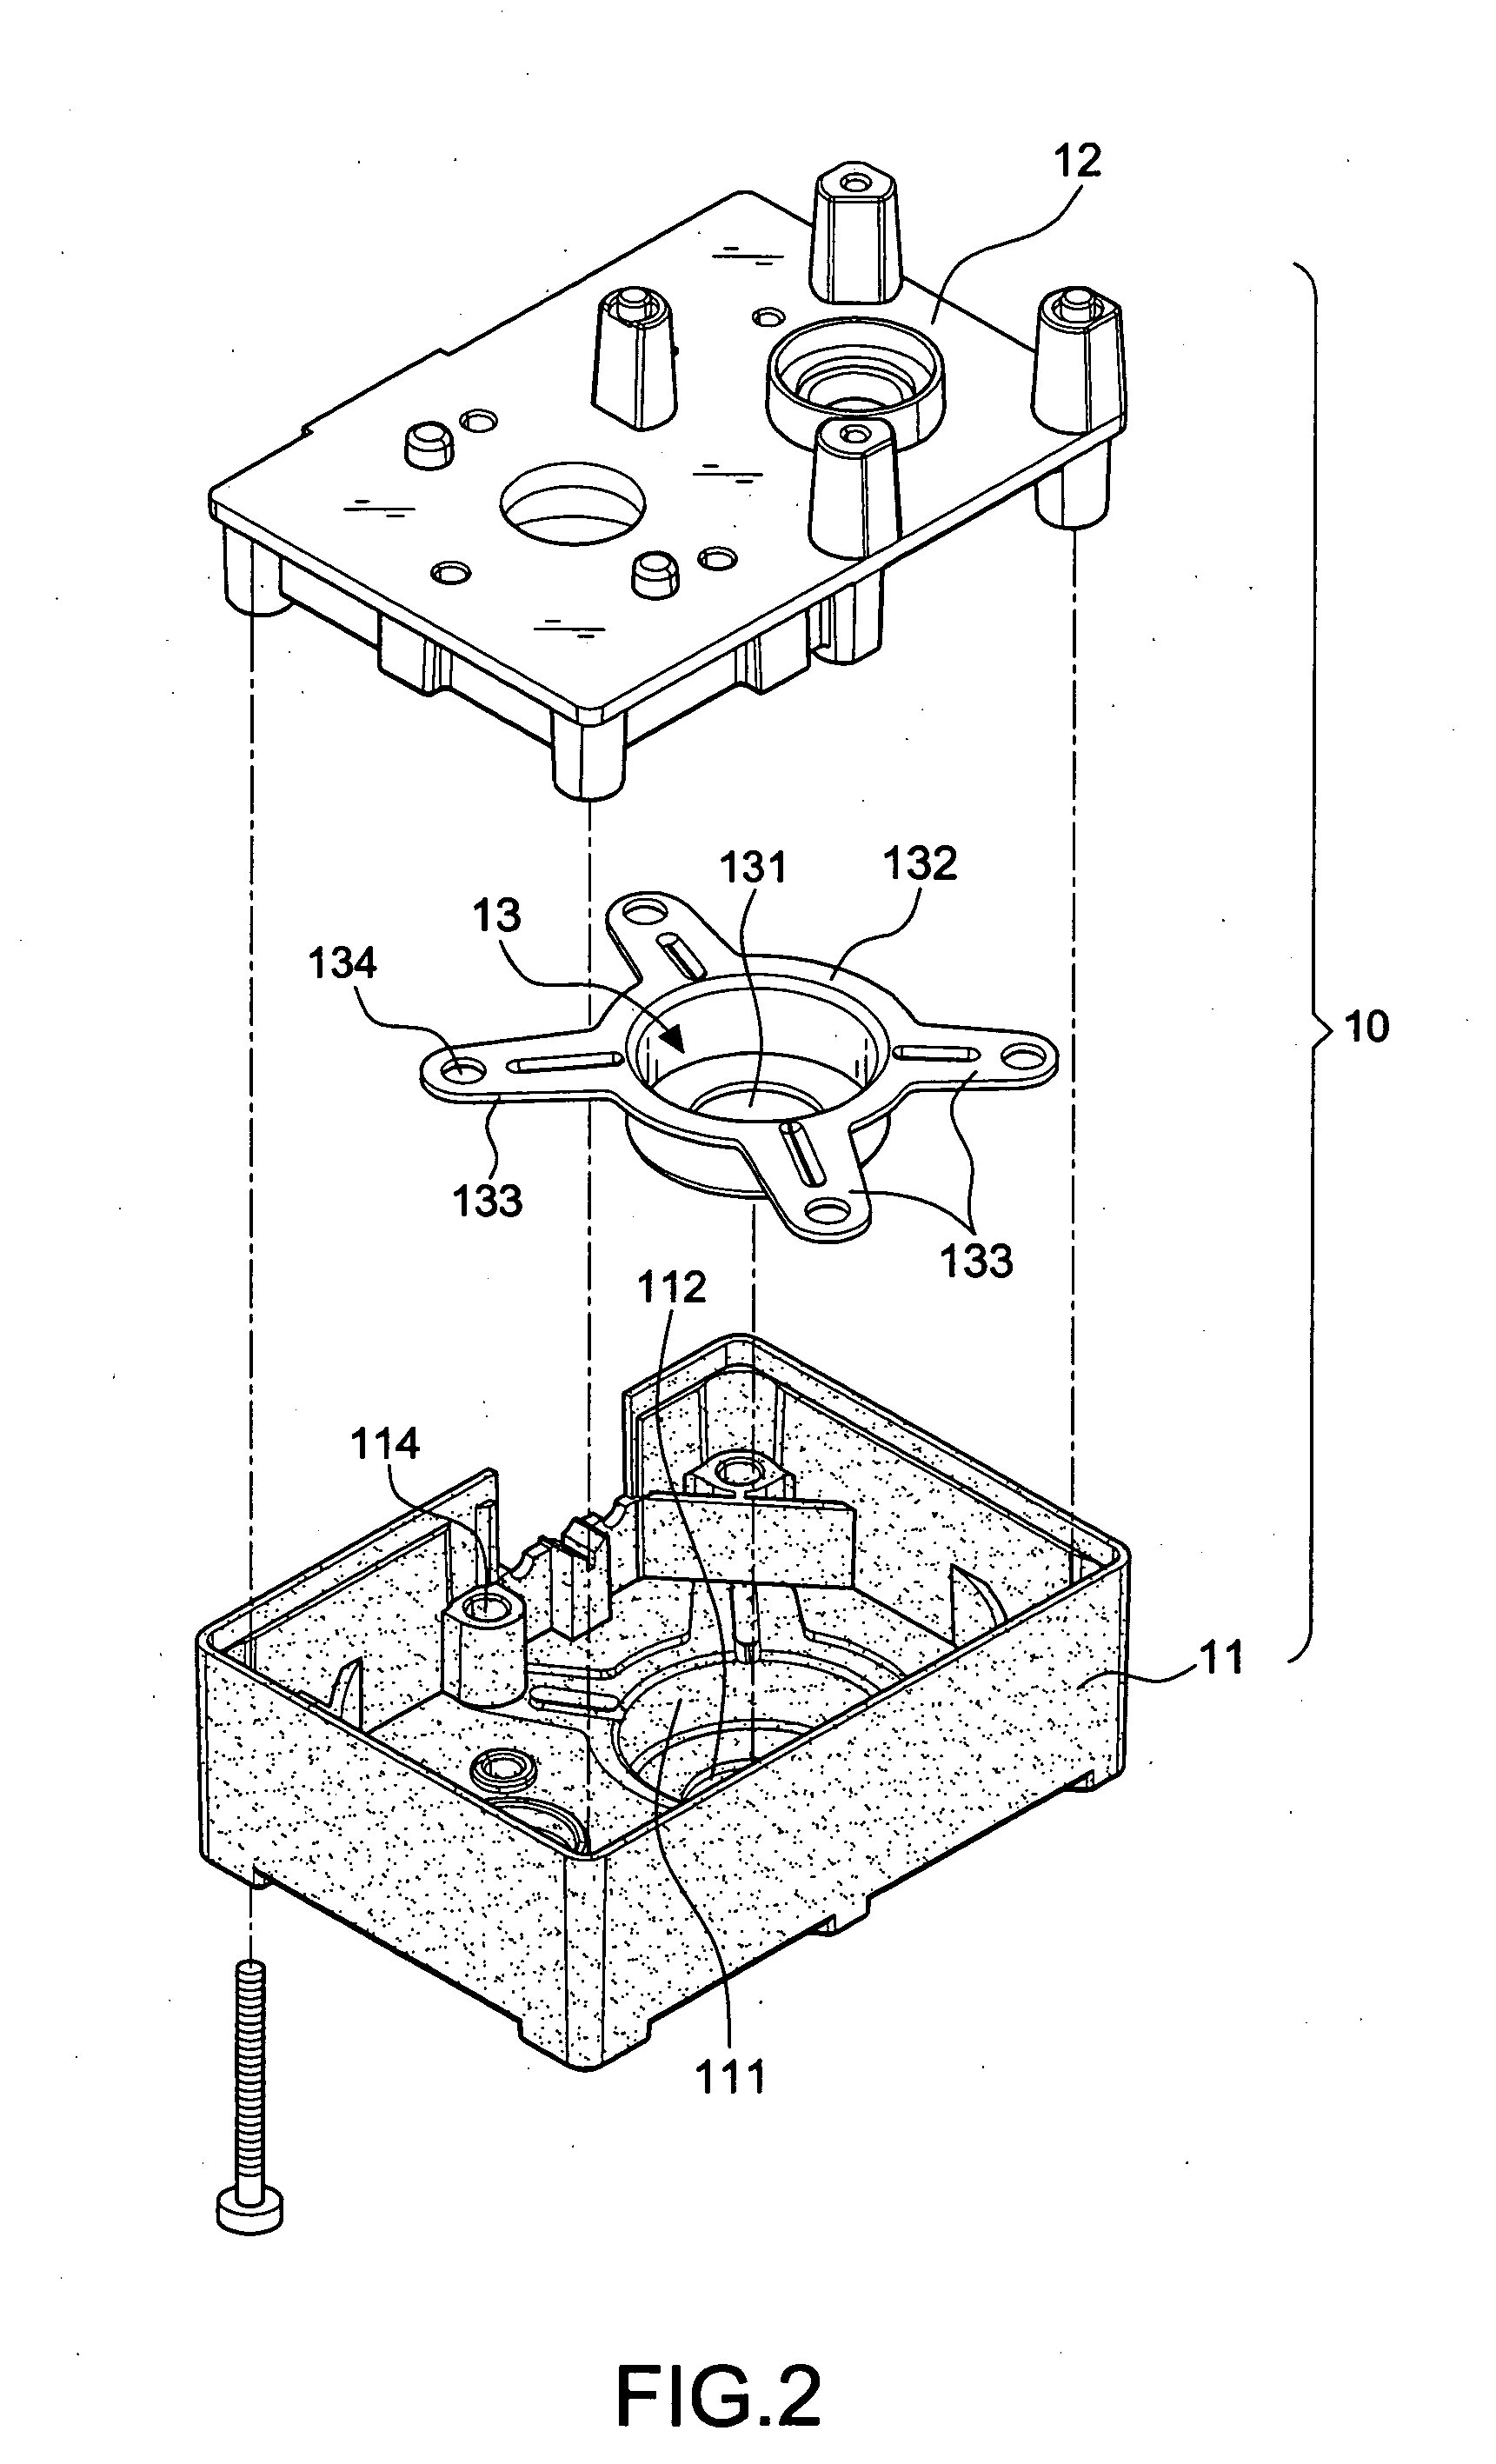 Lifting mechanism for an exercise apparatus